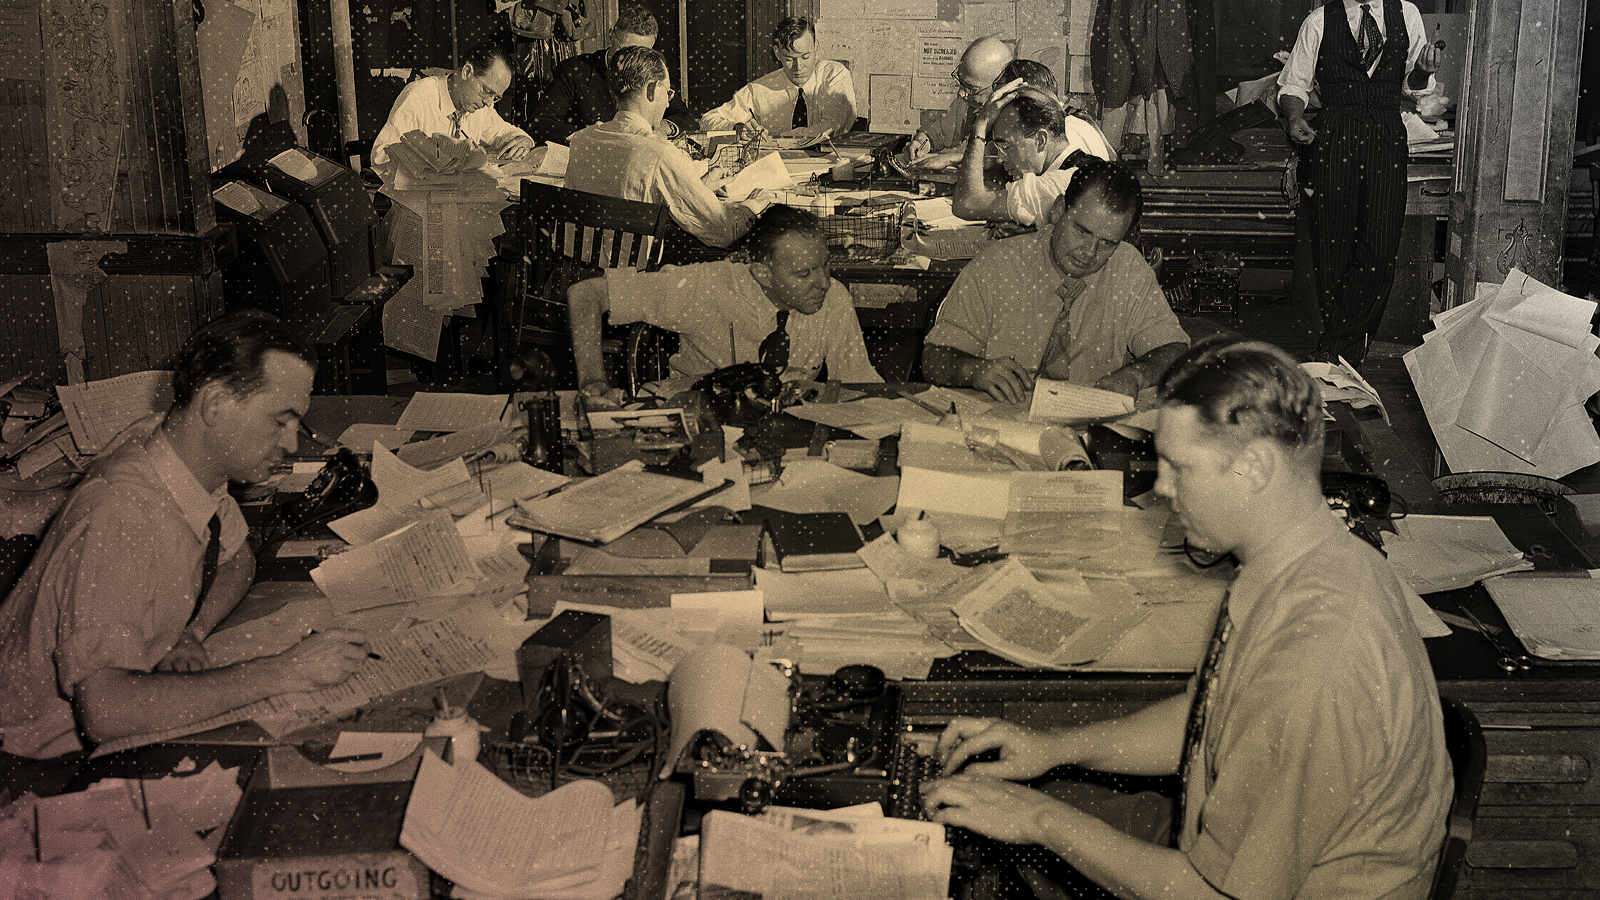 A black and white photo of journalists and editors hard at work in an old newsroom circa 1947.